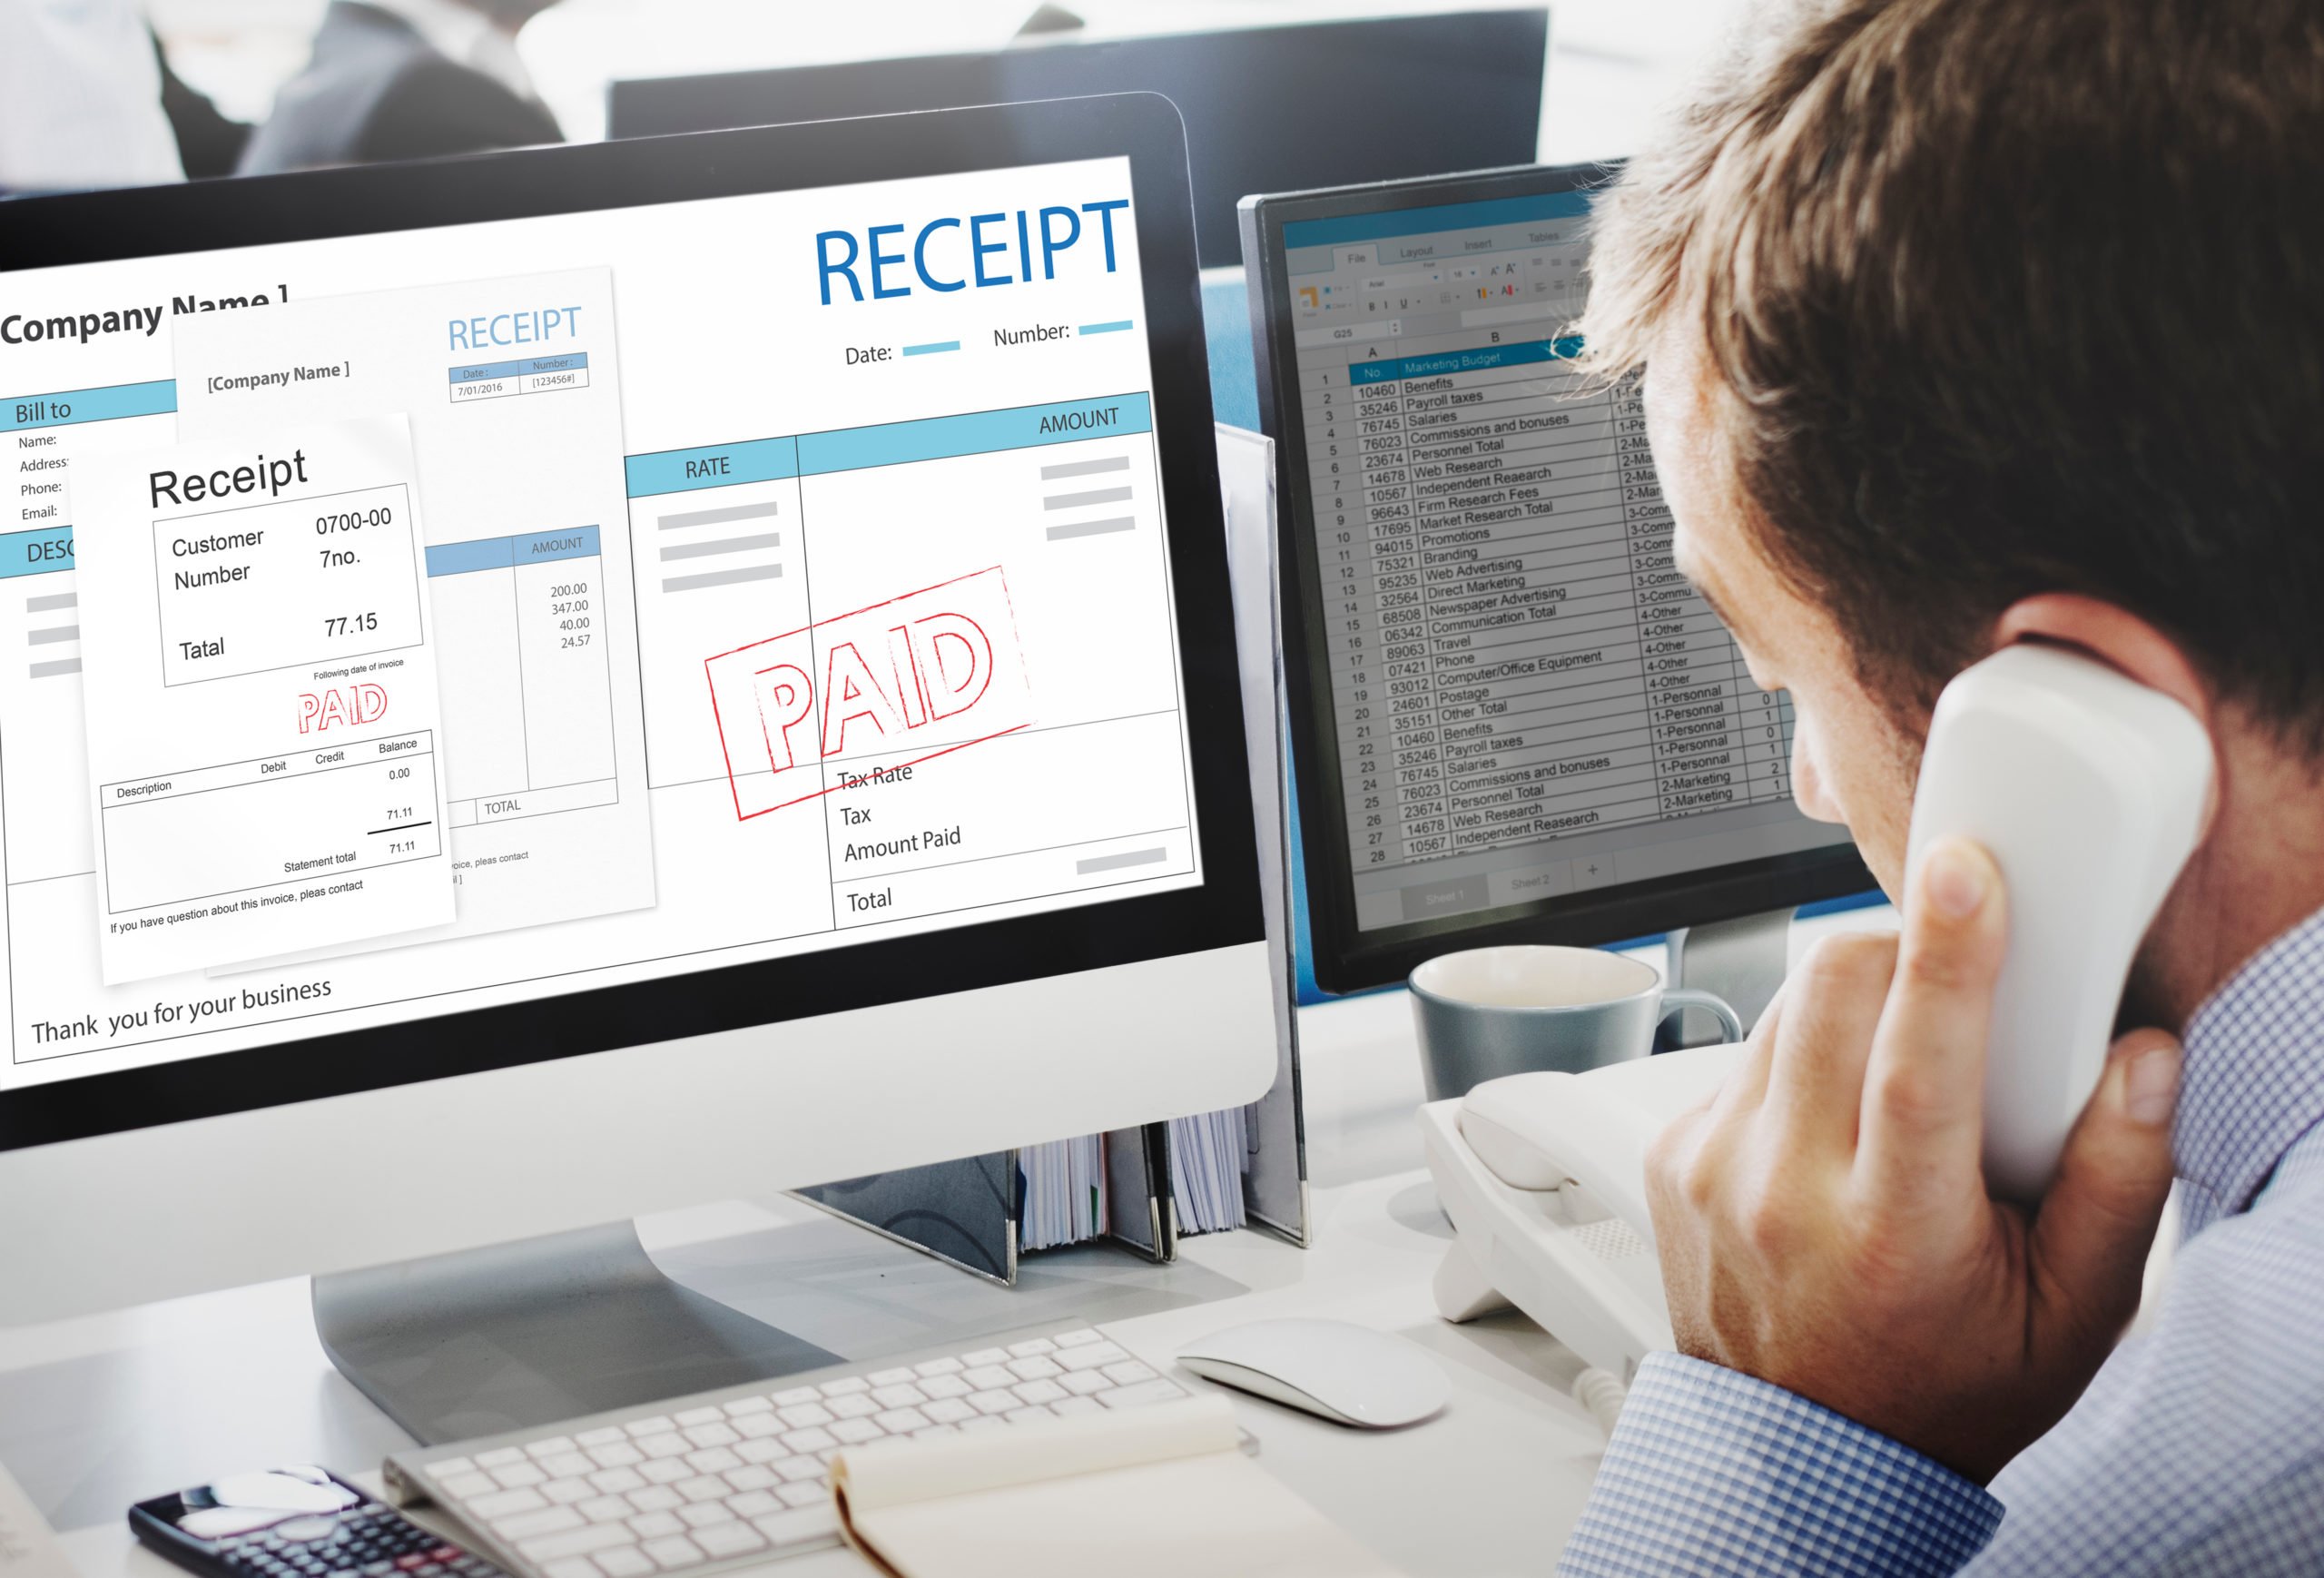 Invoice vs Receipt: Is an Invoice the Same as a Receipt?